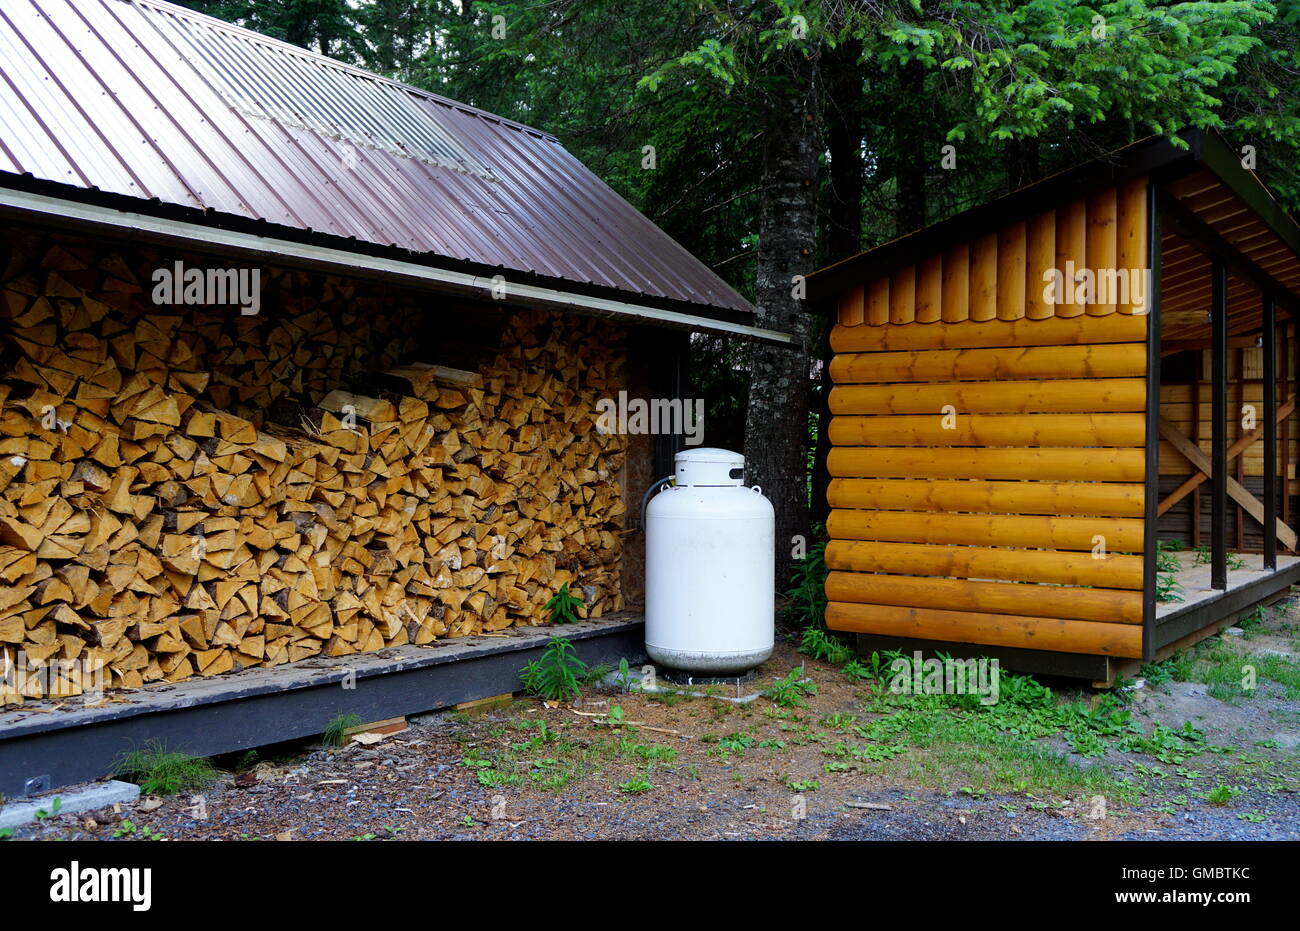 Two sources of fuels, renewable and non-renewable (chopped wood versus gas) displayed at Stoney Creek Inn, Seward, Alaska Stock Photo